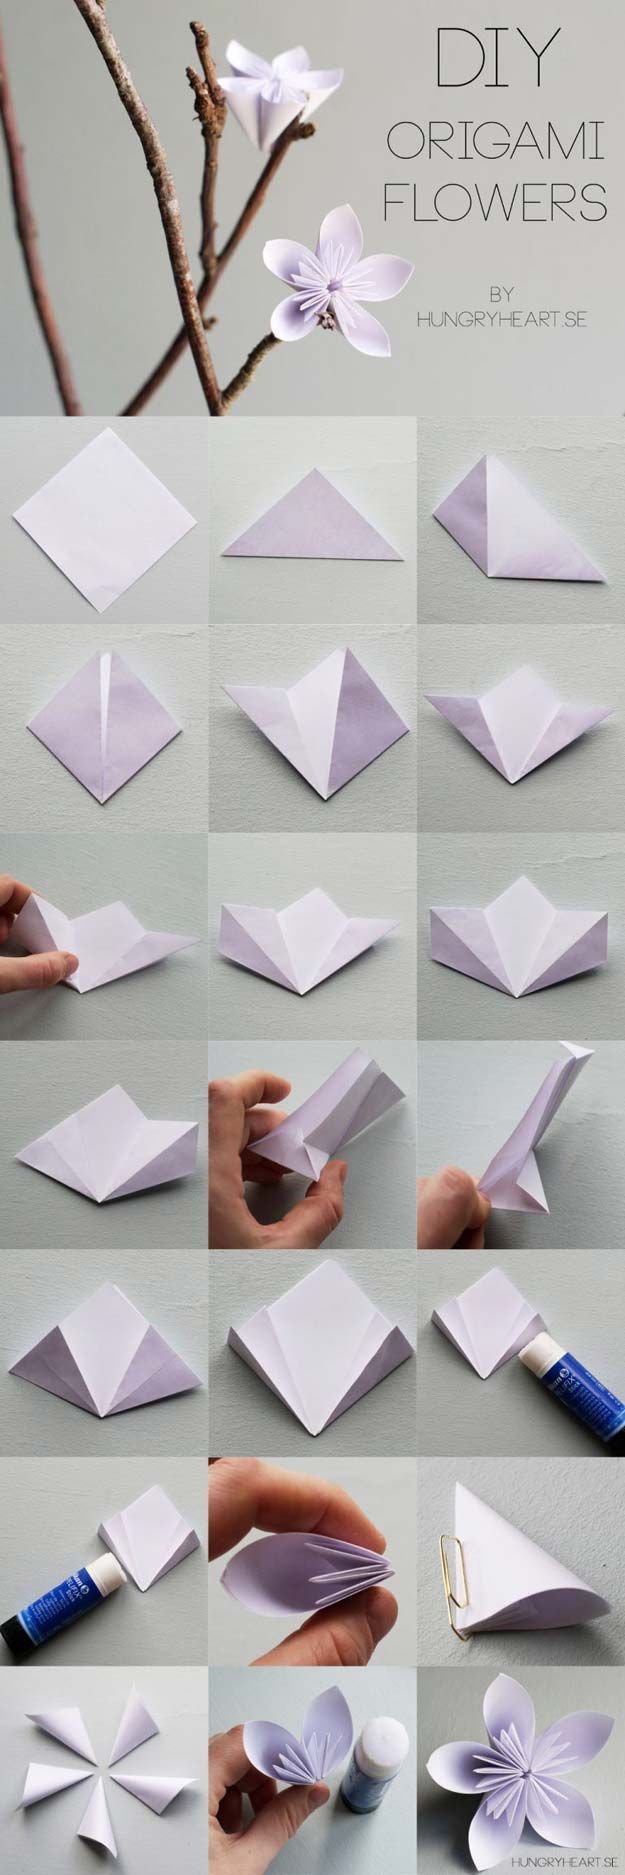 How To Make An Origami Flower Easy 15 Startling Tips How To Make Cool Origami Flowers